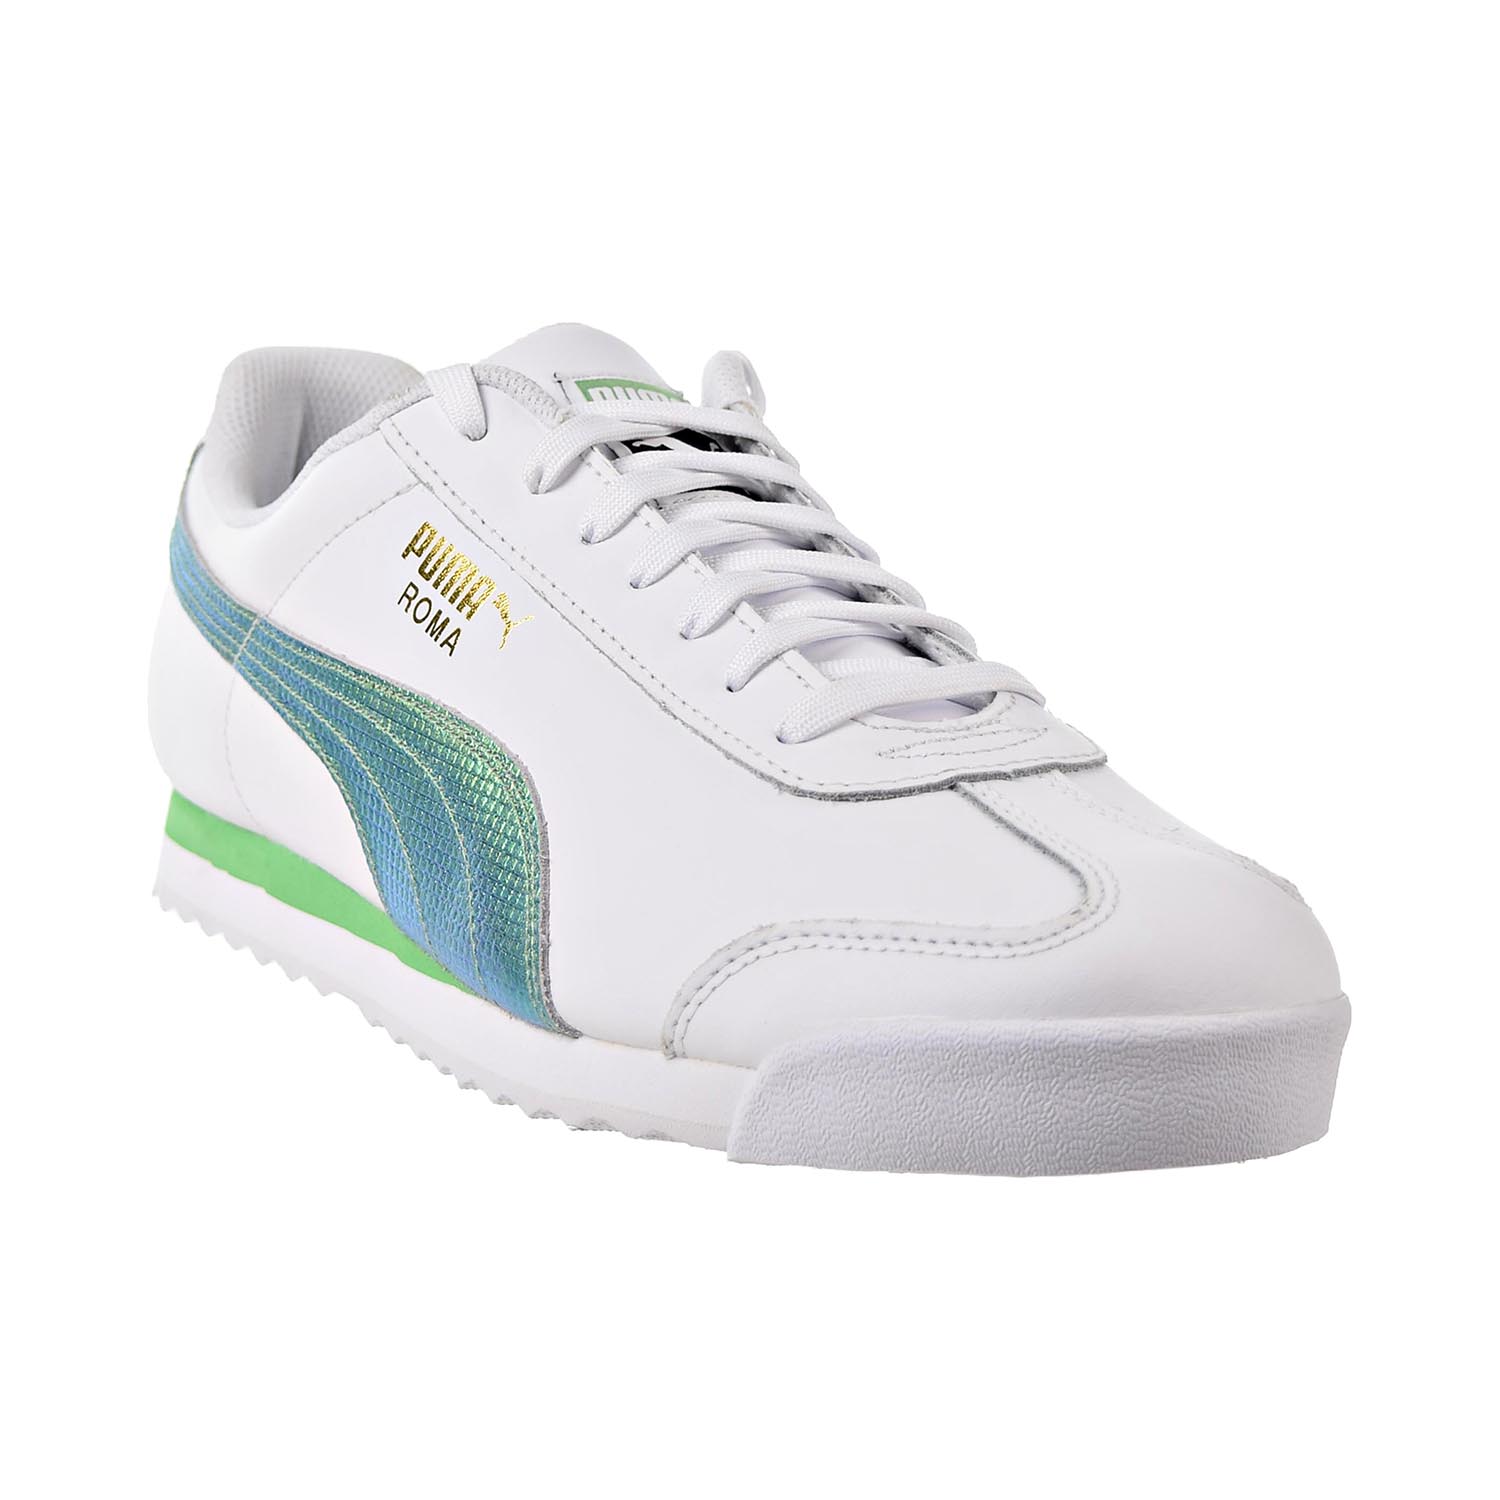 Puma Men's Roma Basic Holo White / Green Gecko Ankle-High Leather Fashion Sneaker - 11.5M - image 2 of 6